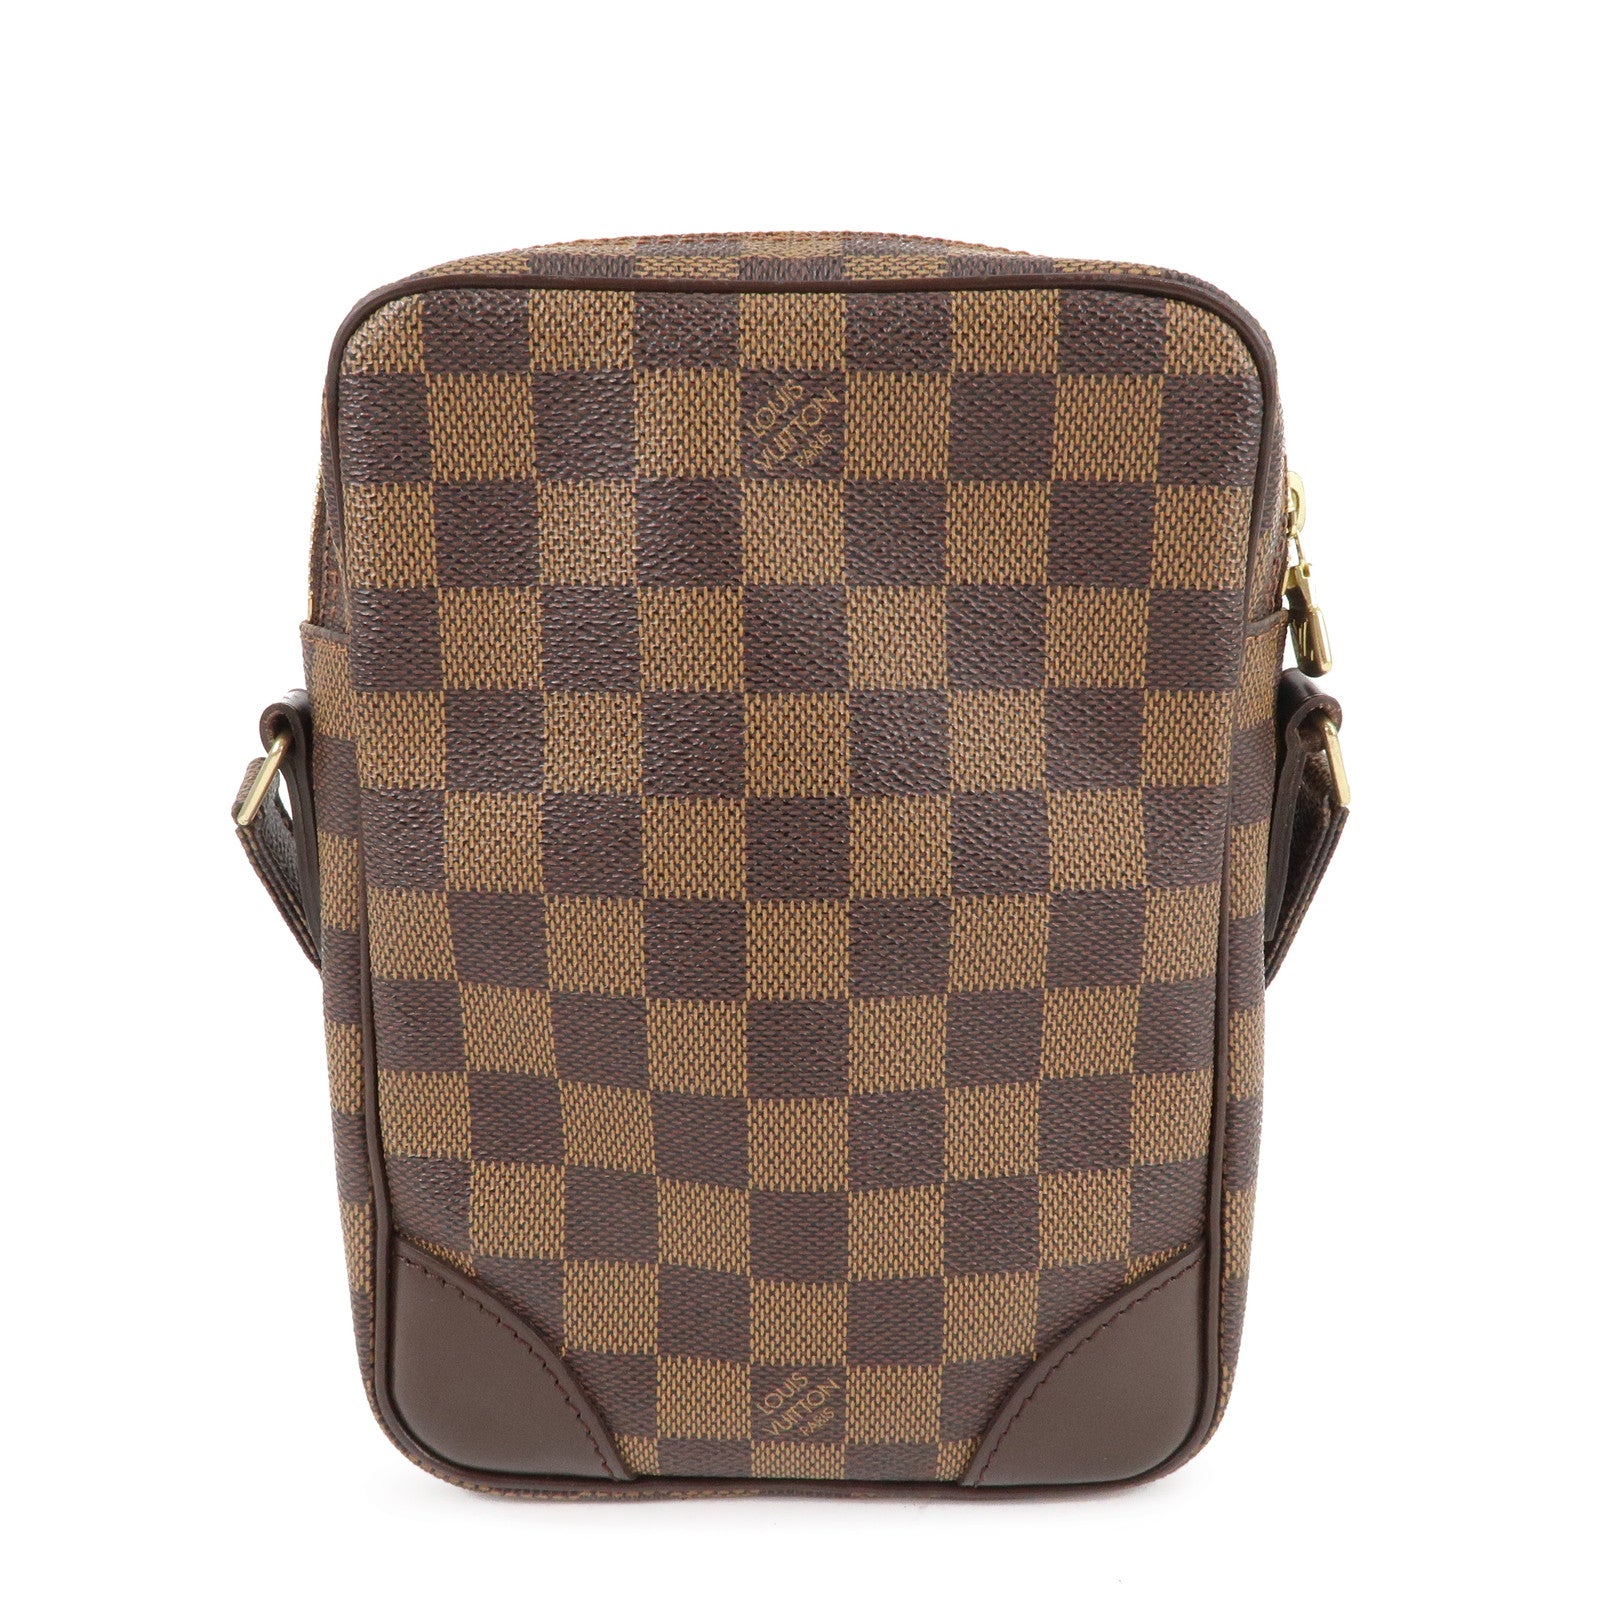 Authentic-Louis-Vuitton-Damier-Danube-Shoulder-Bag-Special-Order-N48061-Used-F/S  – dct-ep_vintage luxury Store